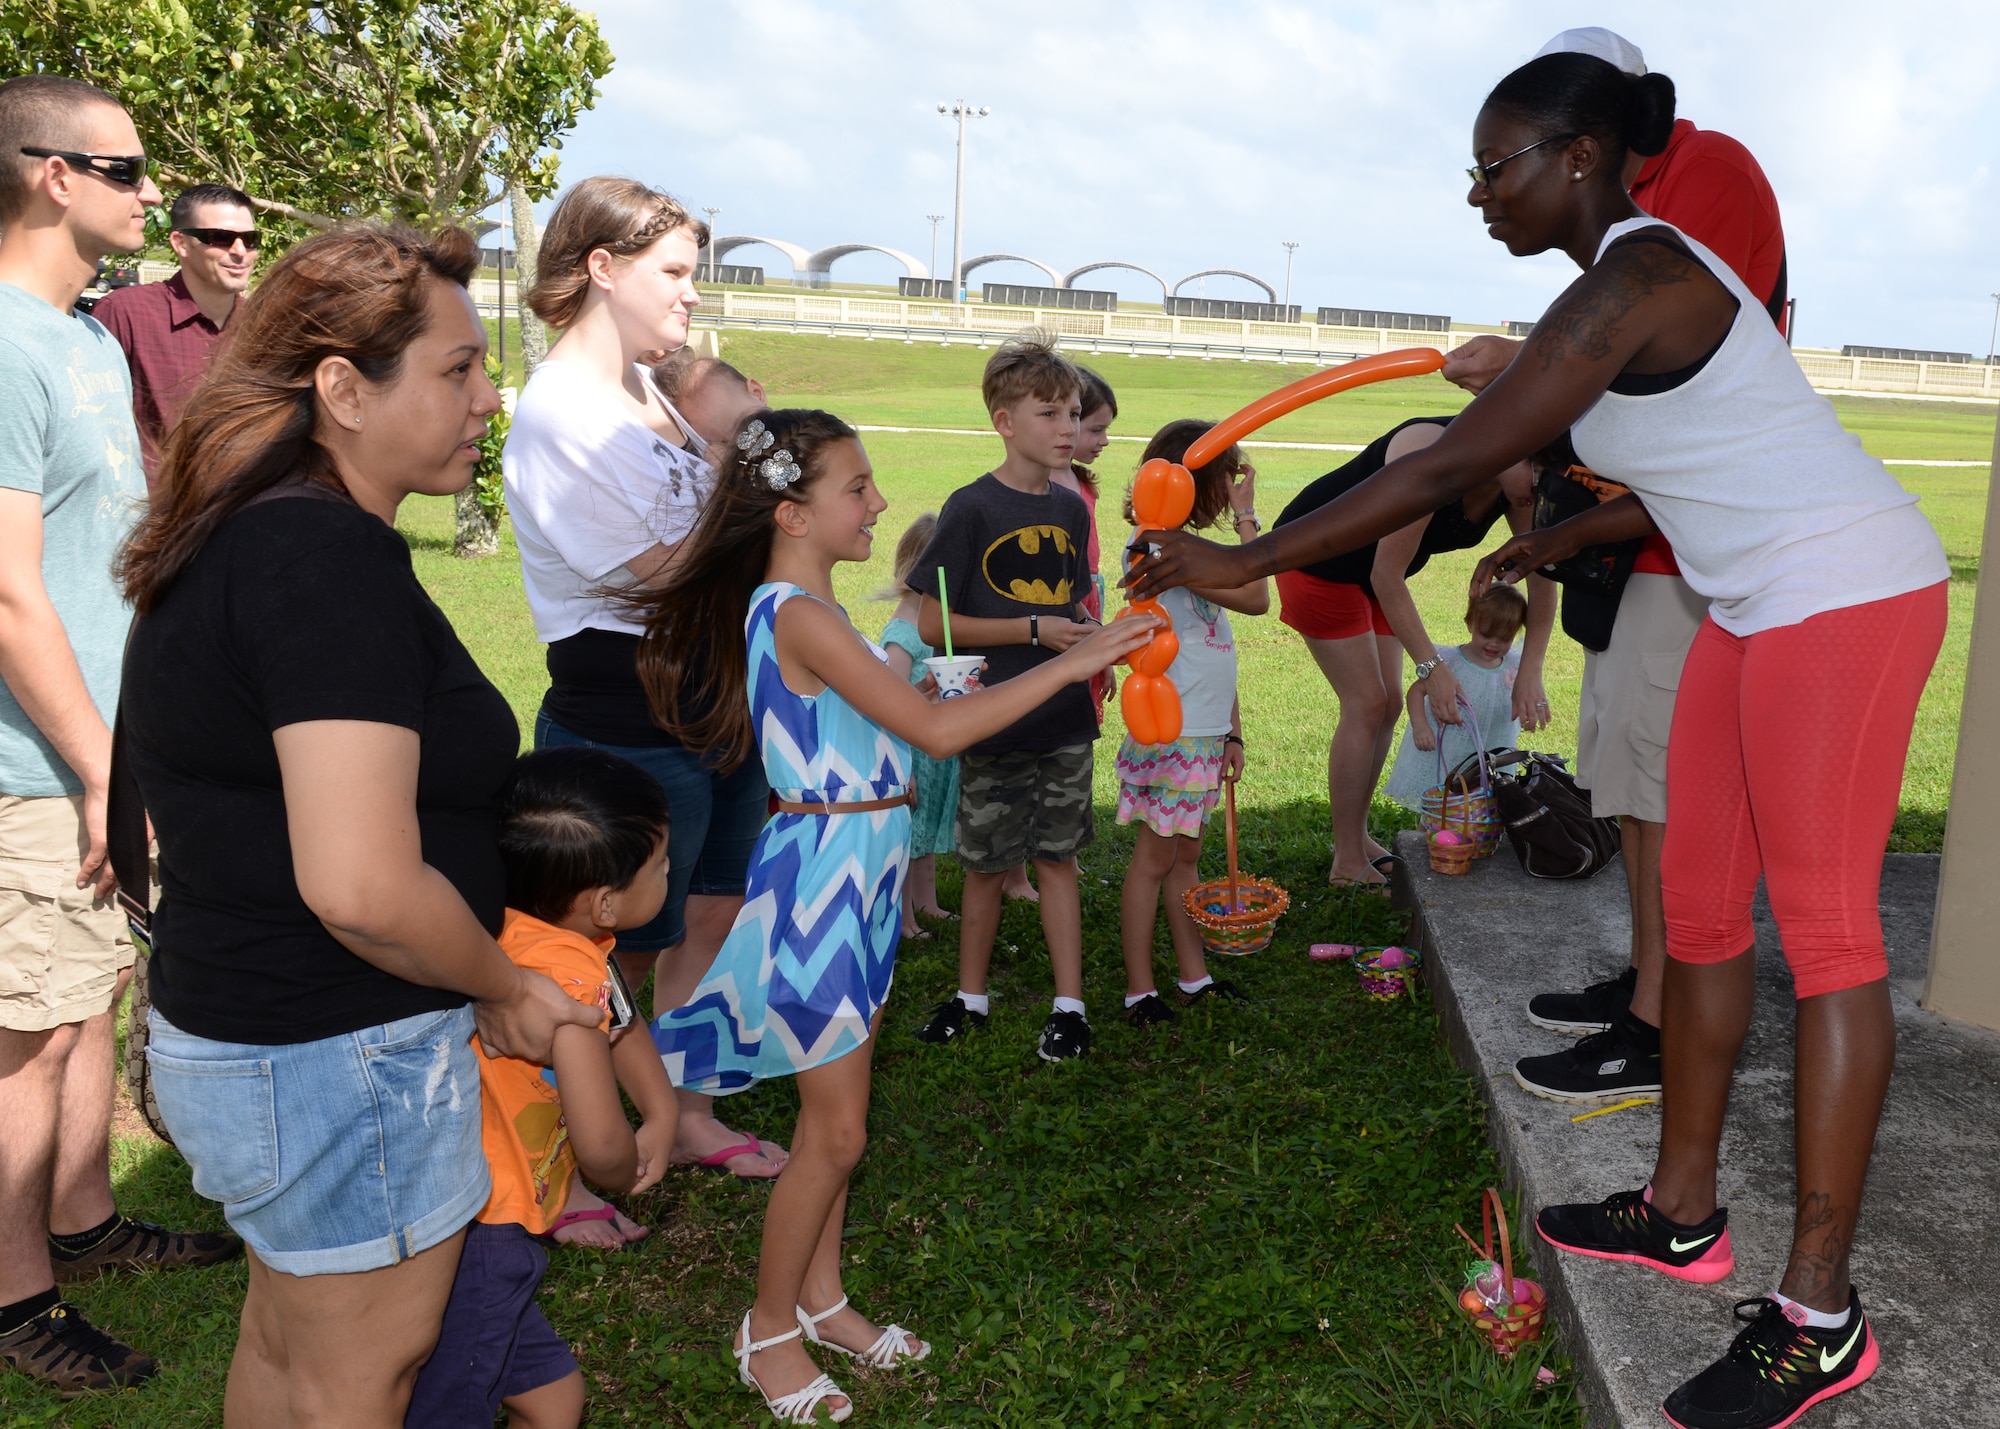 Staff Sgt. Mahawa Barber, 36th Mobility Response Squadron, gives a child a balloon during an Easter egg hunt April 4, 2015, at Andersen Air Force Base, Guam. The annual event included an egg hunt, games, face painting, food and other activities that drew more than 650 children. (U.S. Air Force photo by Senior Airman Cierra Presentado/Released)